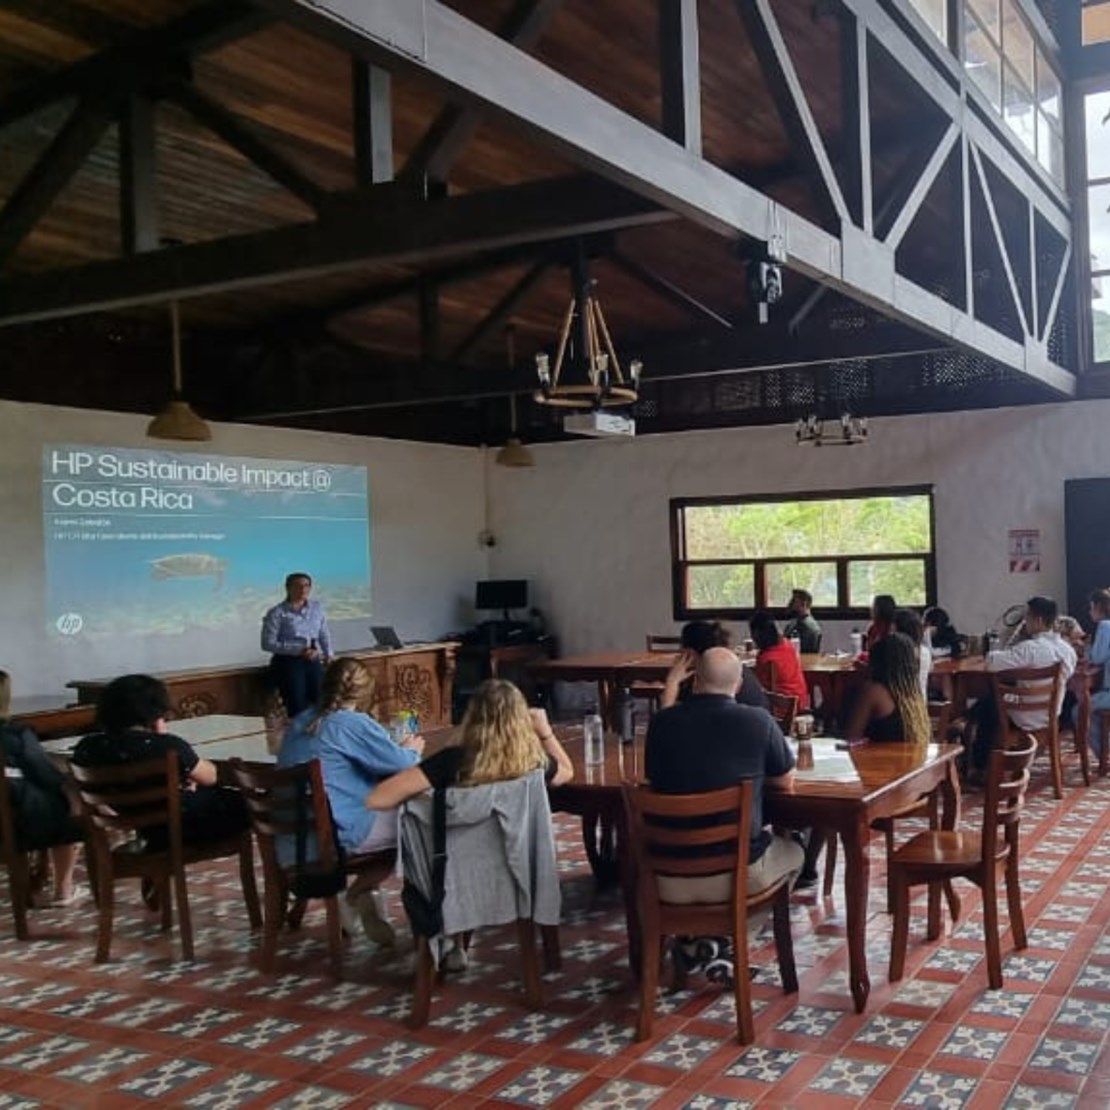 MBA students attend a session while in Costa Rica